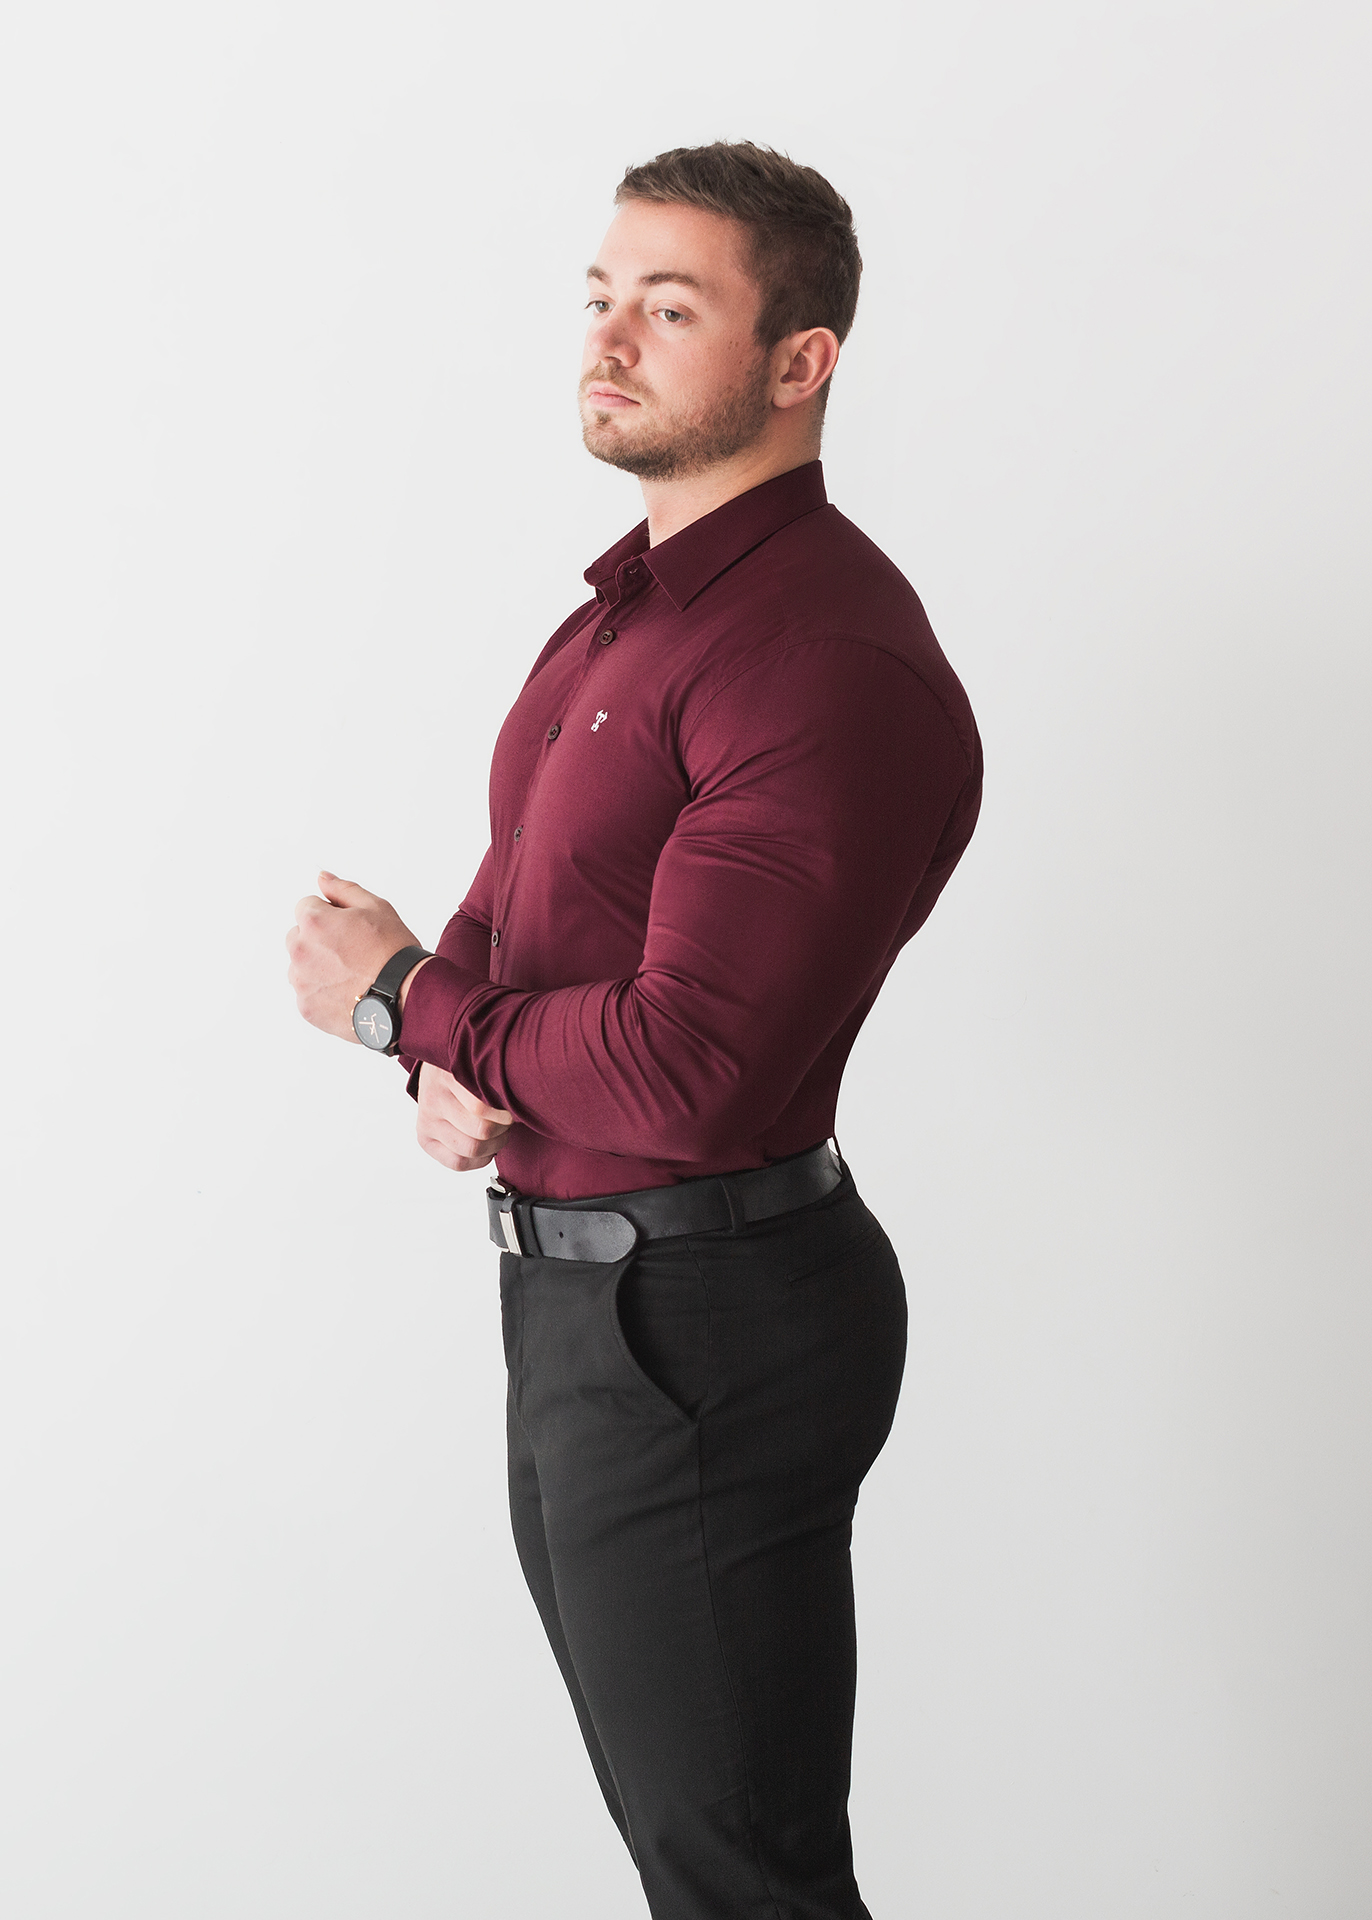 The first of our types of product photography to feature a model. This image shows a muscular male model in a tight-fitting red shirt. The shirt is designed for muscular men, and fits well. He stands at an angle against a white background.